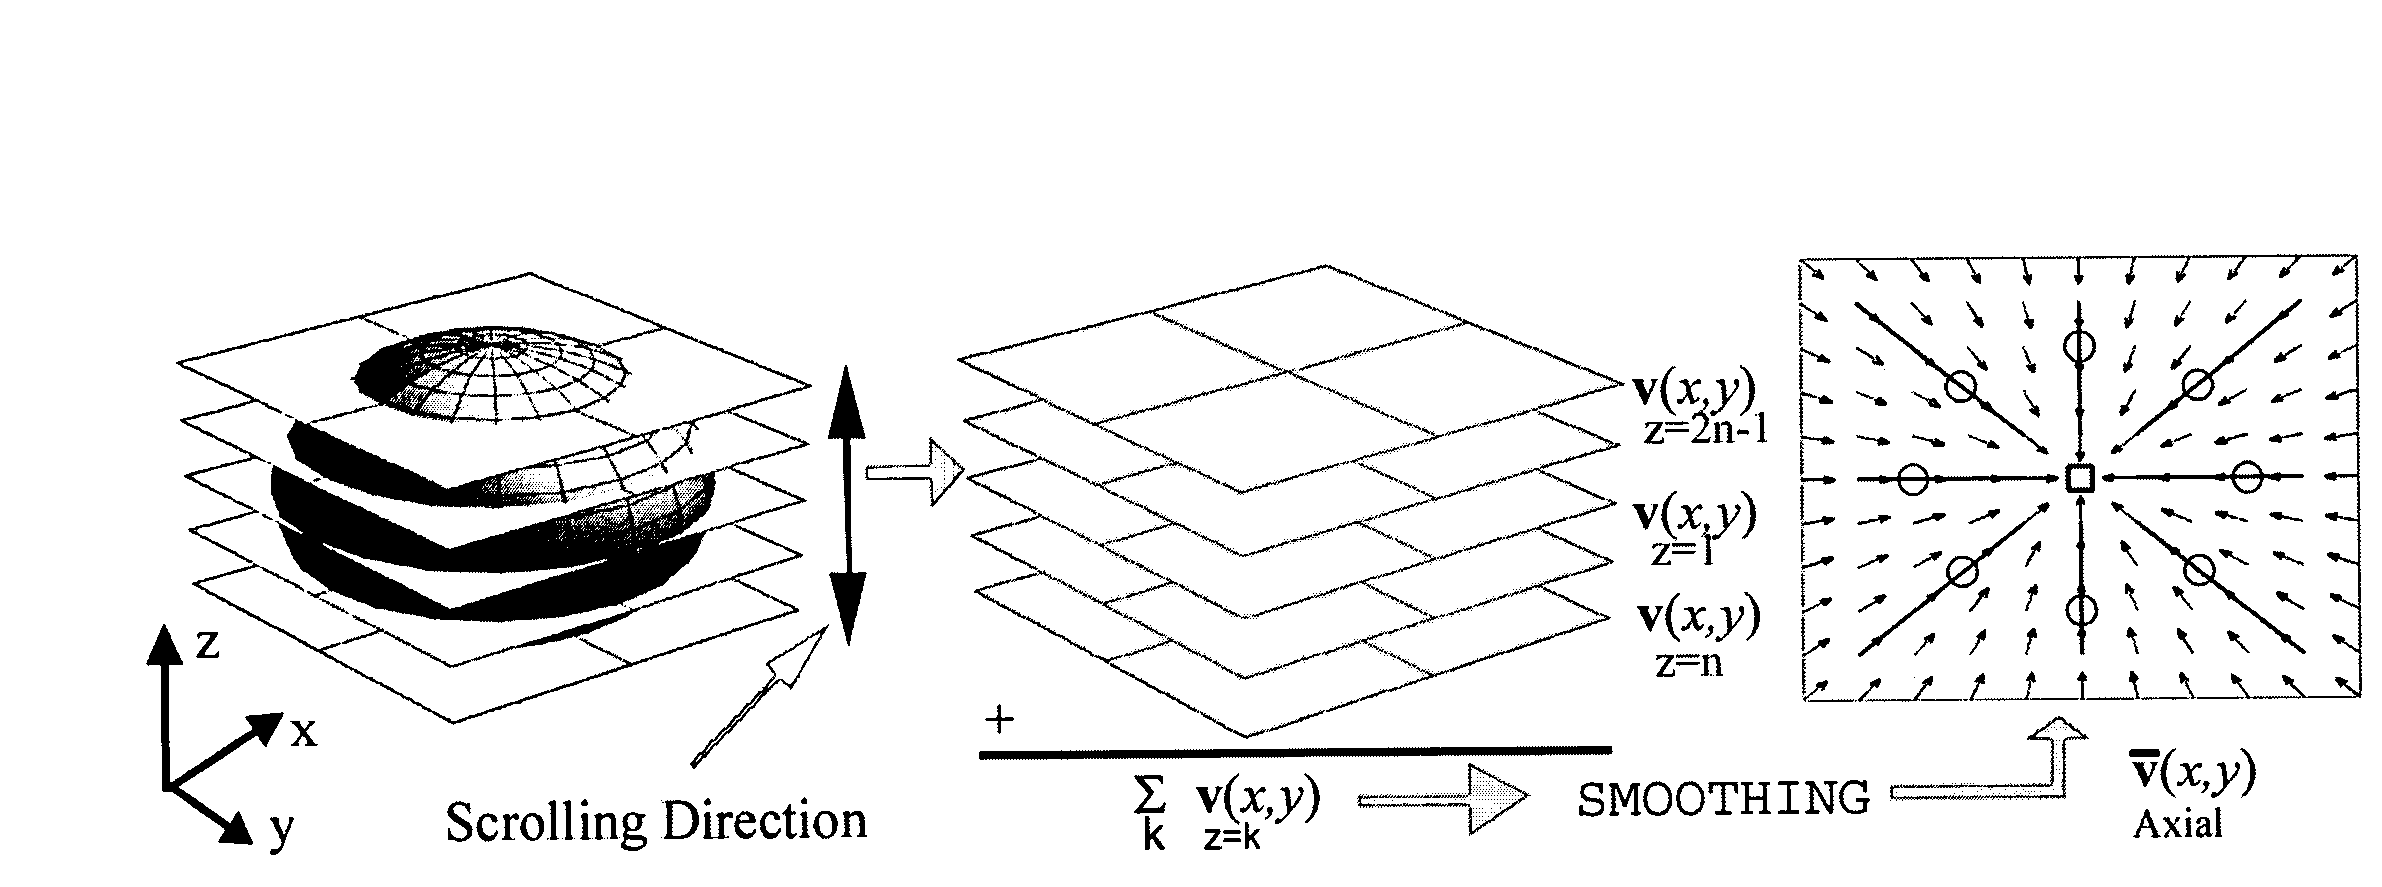 Method for detecting and classifying a structure of interest in medical images